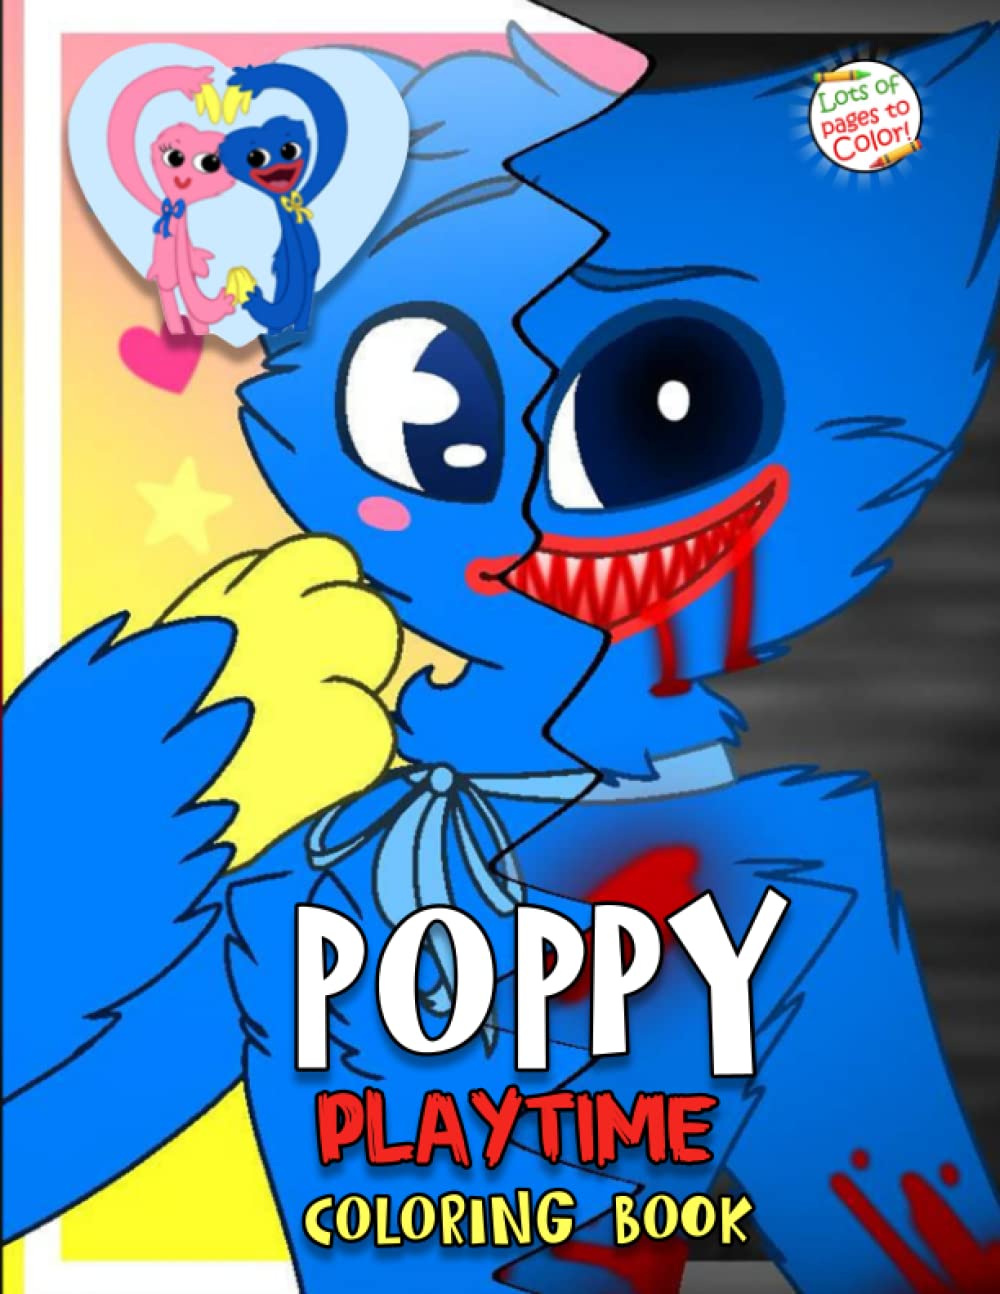 Poppy Playtime Coloring Book: Huggy Wuggy Coloring Book With High Quality Poppy Playtime Illustrations For Kids And Adults To Relax And Have Fun: Scott, Eric: 9798775213022: Books